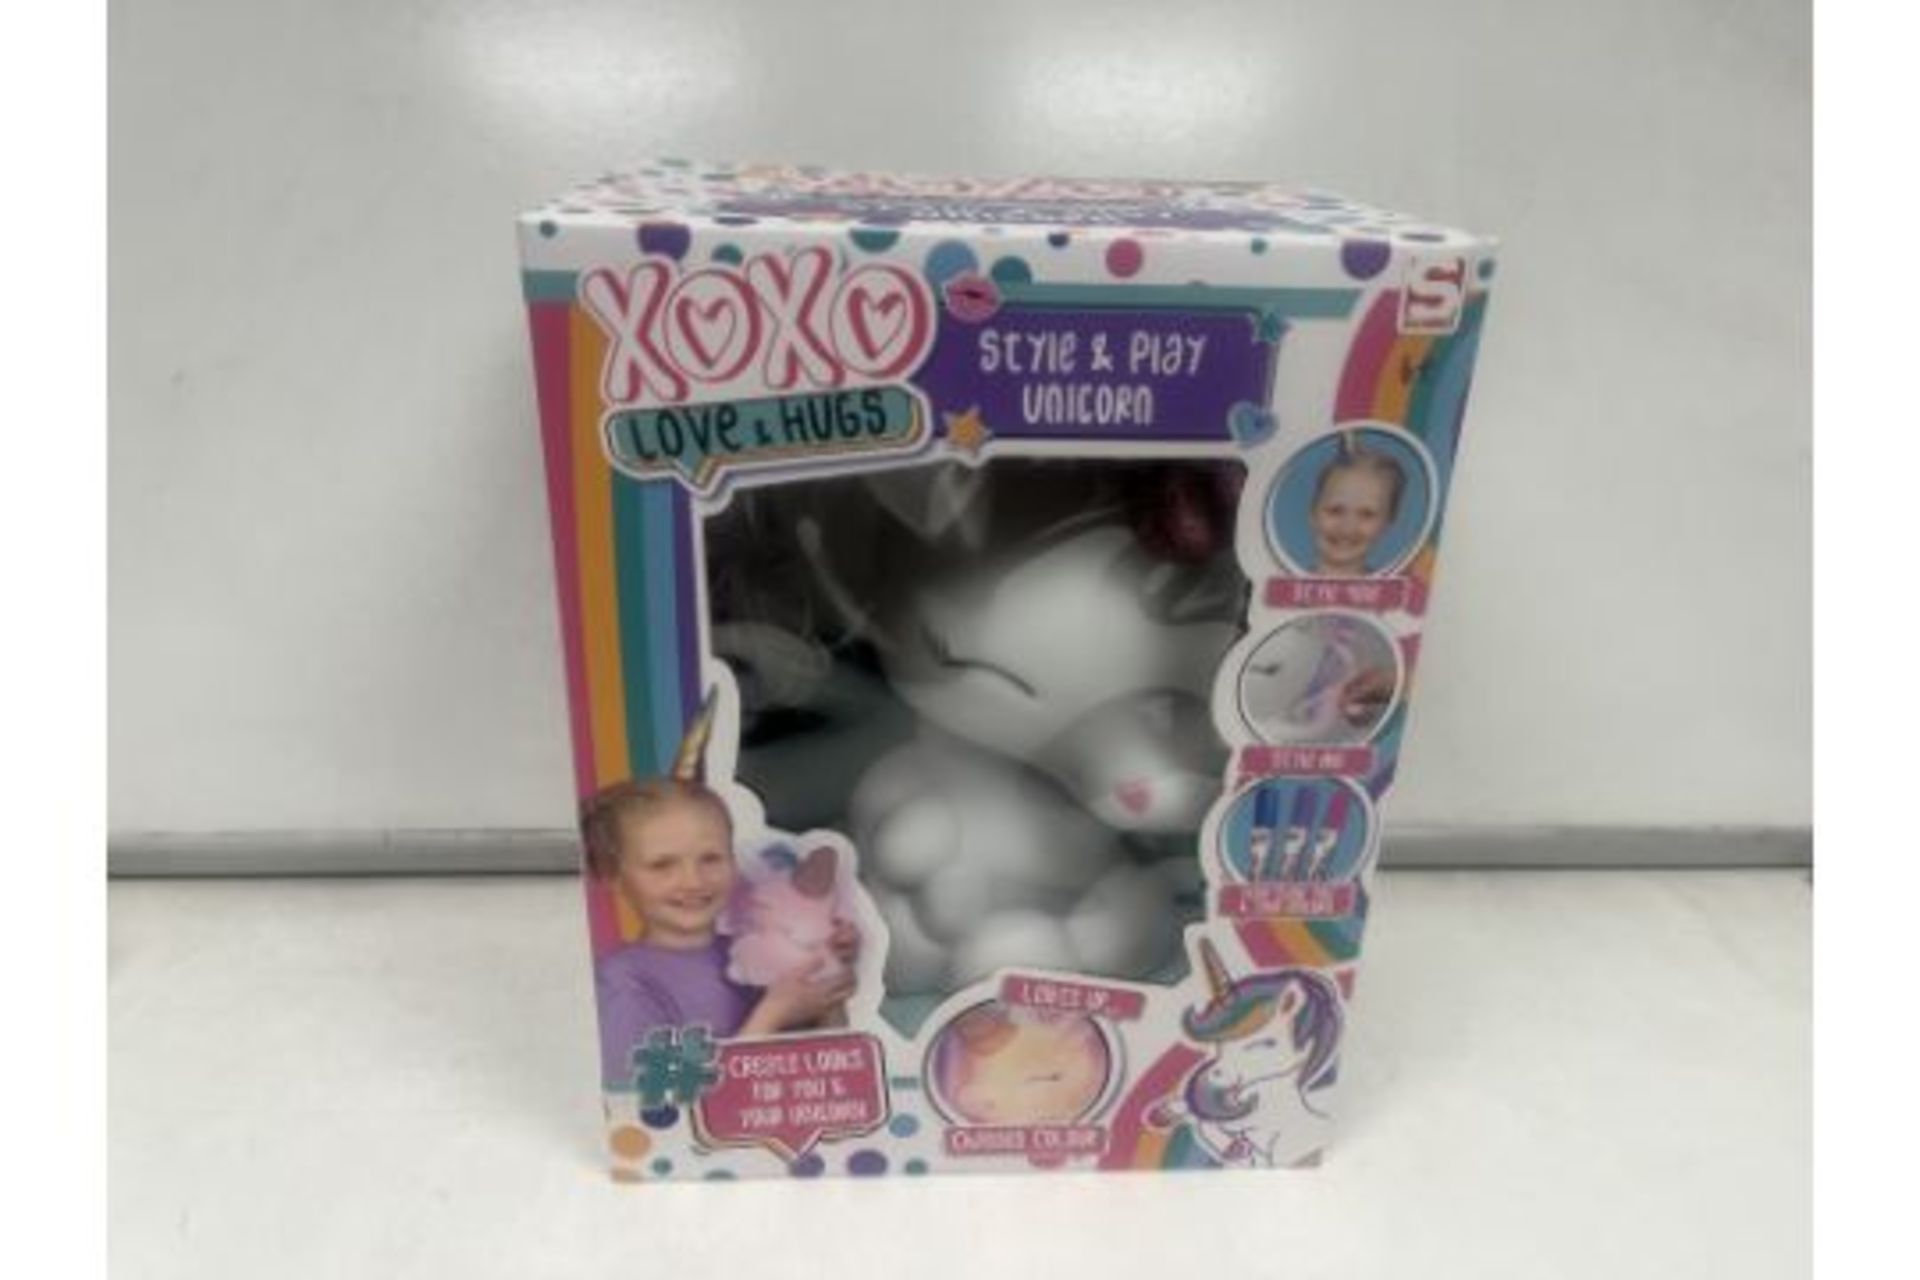 10 x New & Boxed Love & Hugs XOXO | Style and Play Unicorn Night Light | Lights Up & Changes Colour.